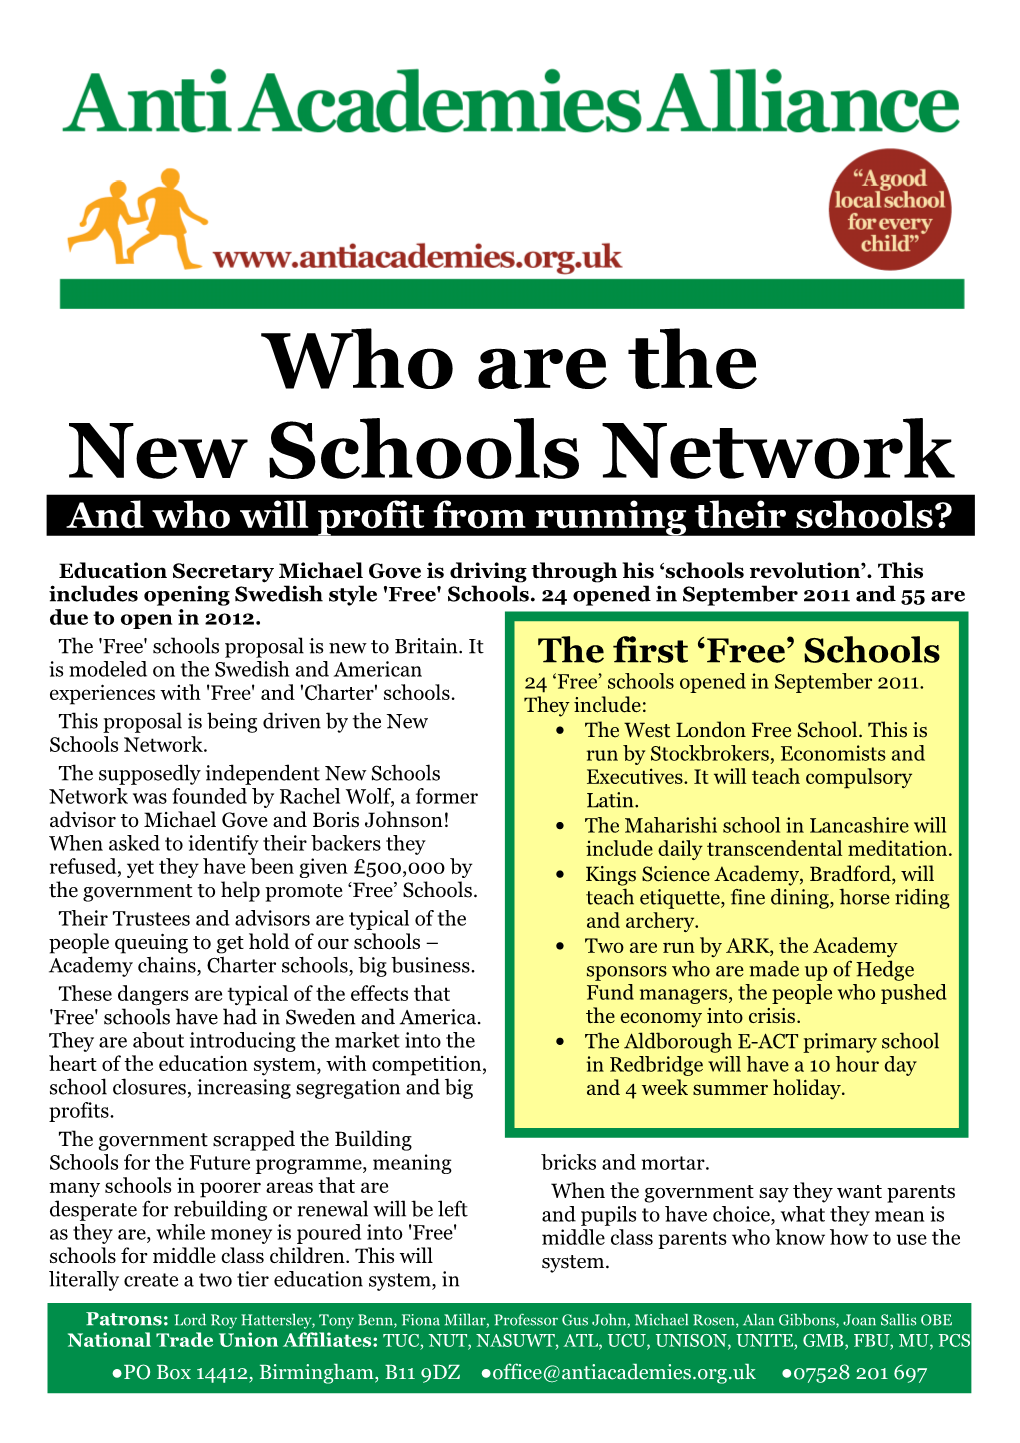 Who Are the New Schools Network and Who Will Profit from Running Their Schools?